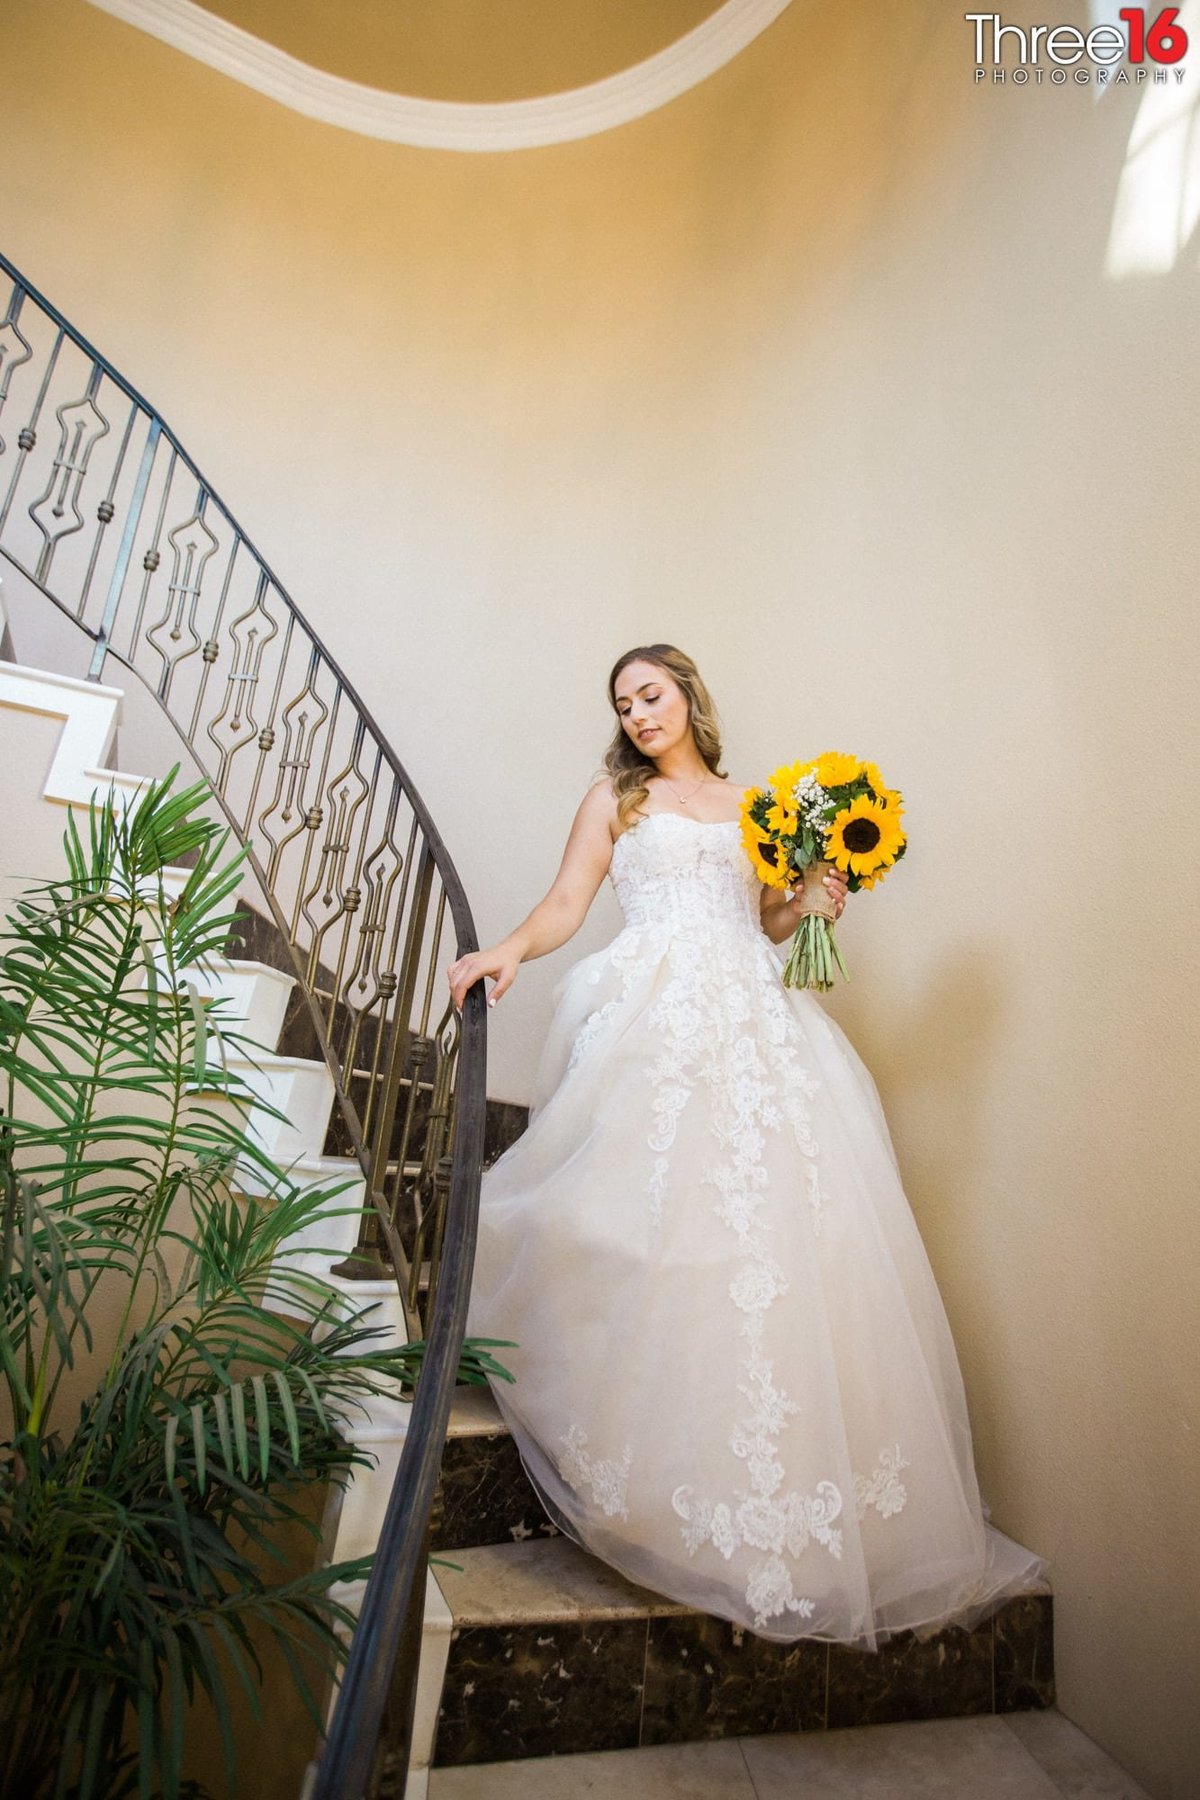 Bride makes her way down the spiral stairs with her sunflower bouquet in her left hand